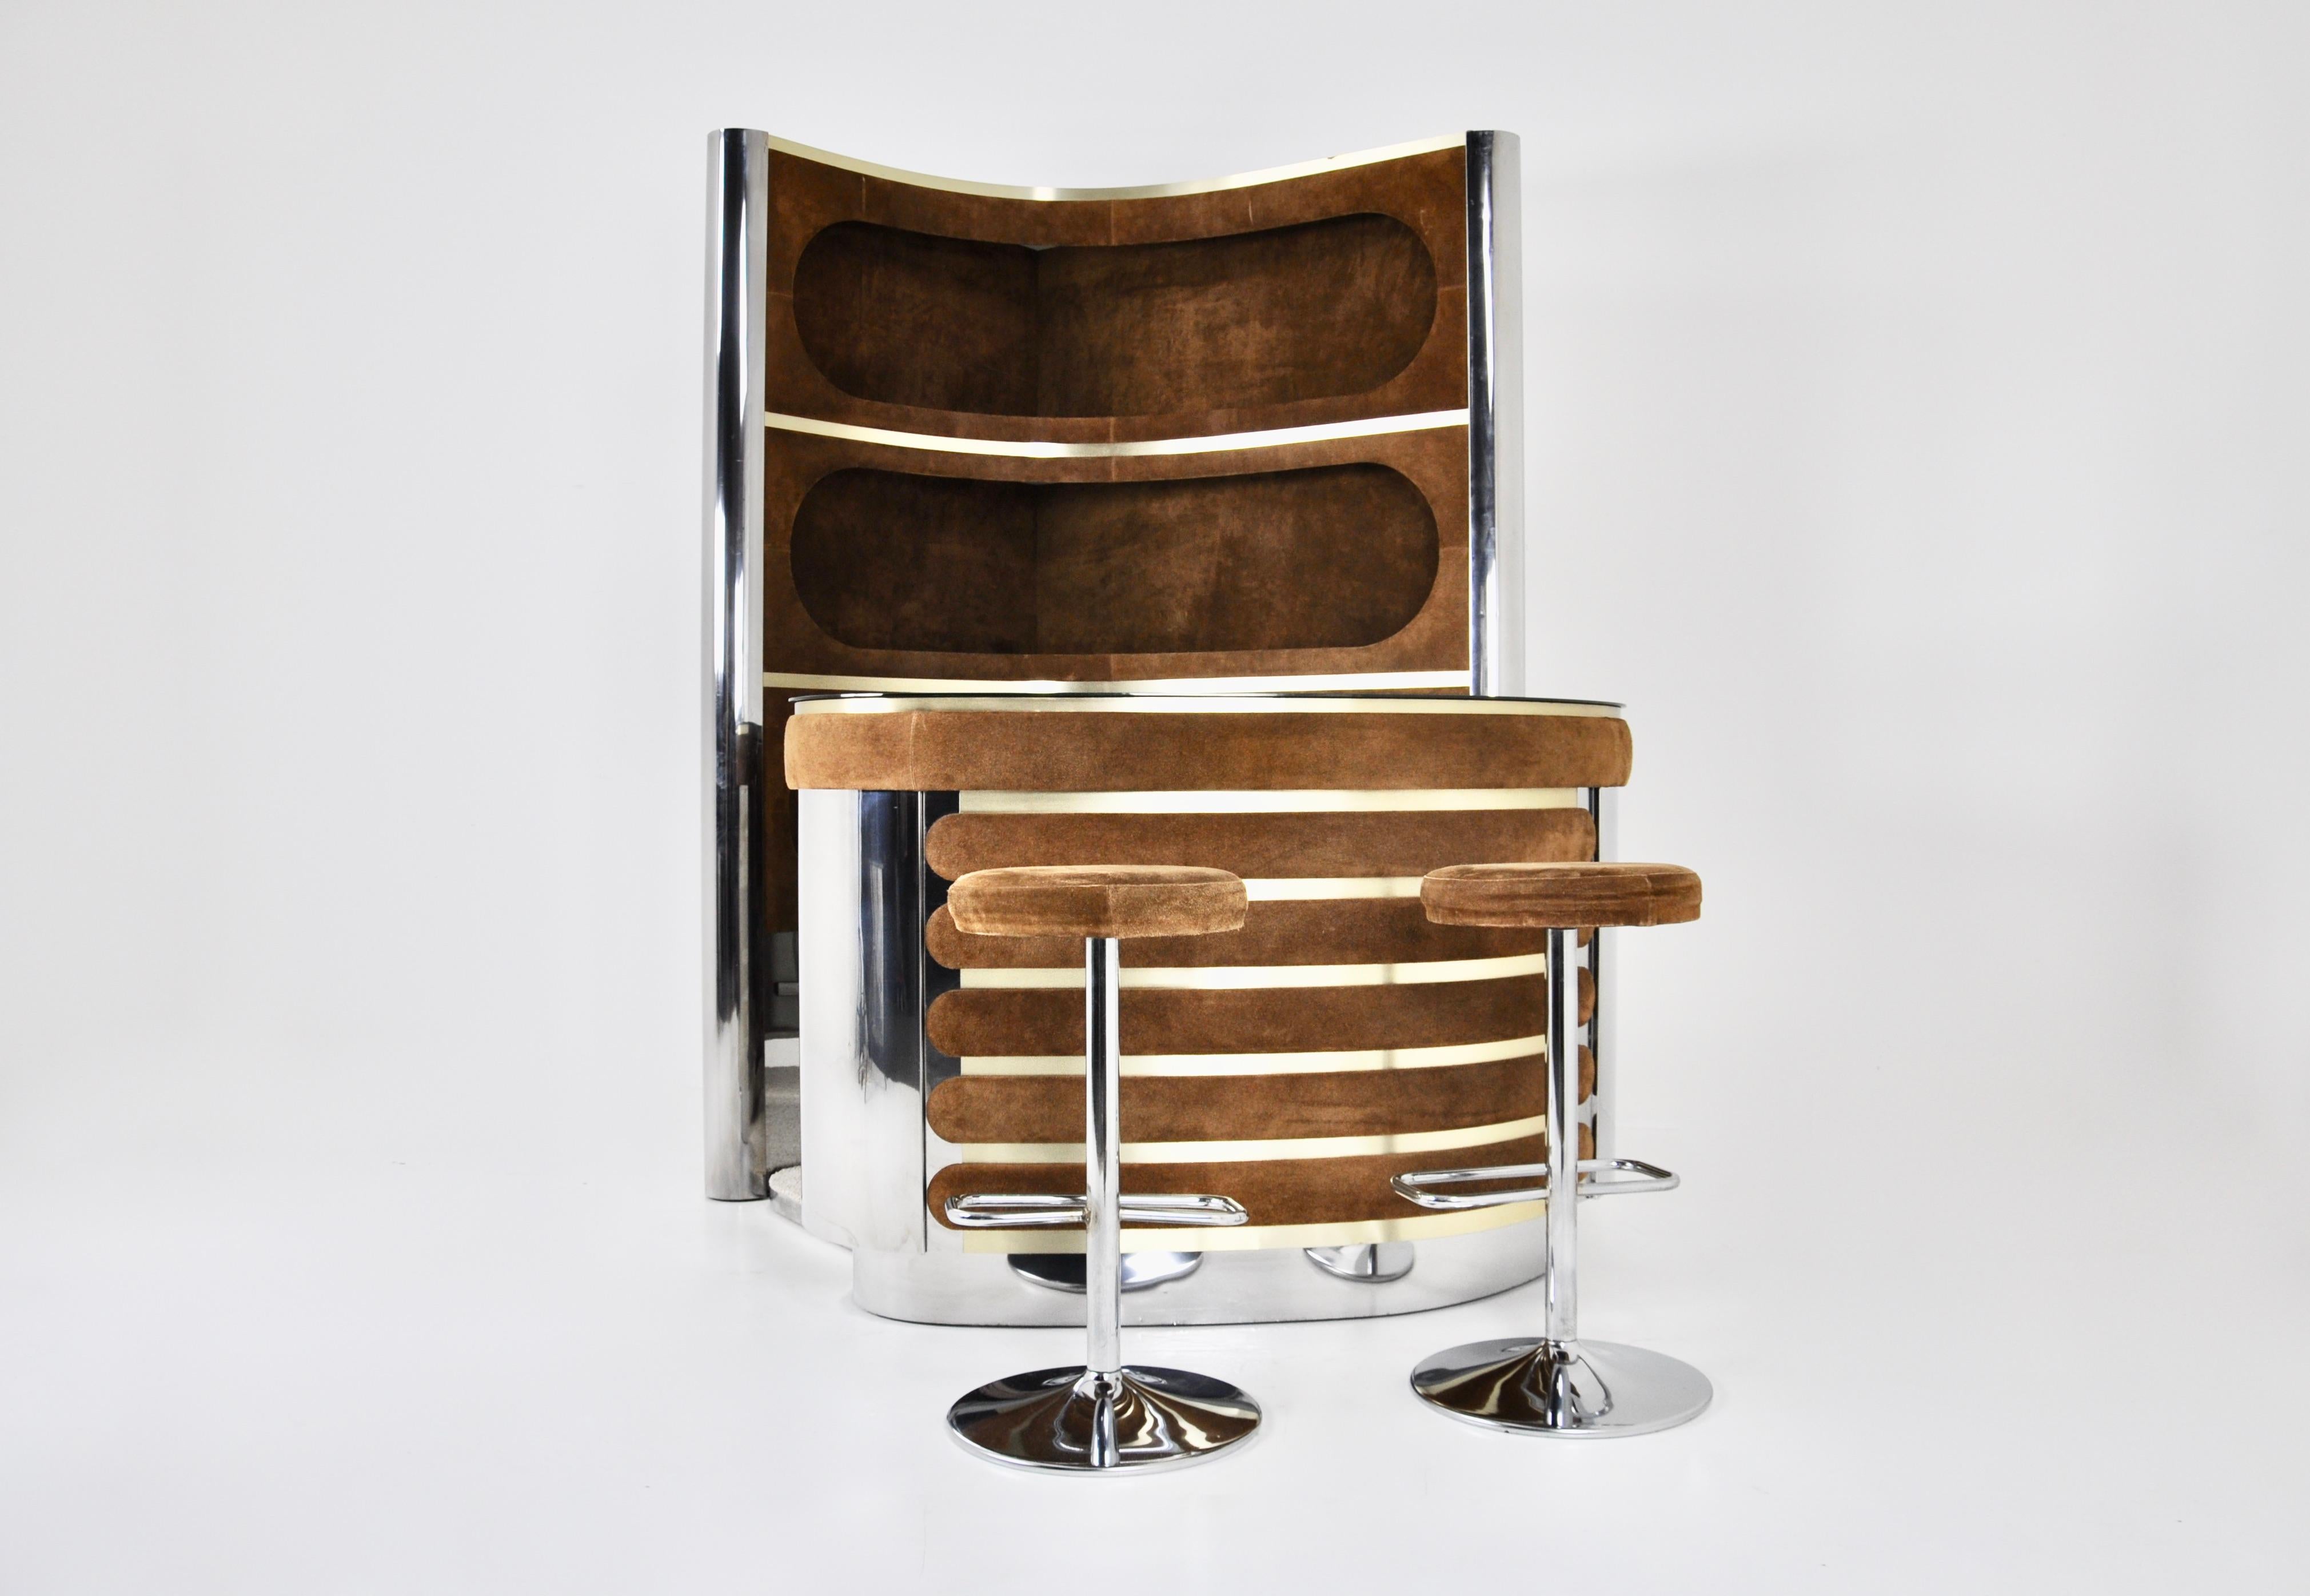 The set includes a cabinet with 3 illuminated shelves in suede, chromed metal and brass.  It also includes a counter in suede, chromed metal with a mirrored top, a fridge and a glass cabinet with a shelf. There is a carpeted floor. Height-adjustable